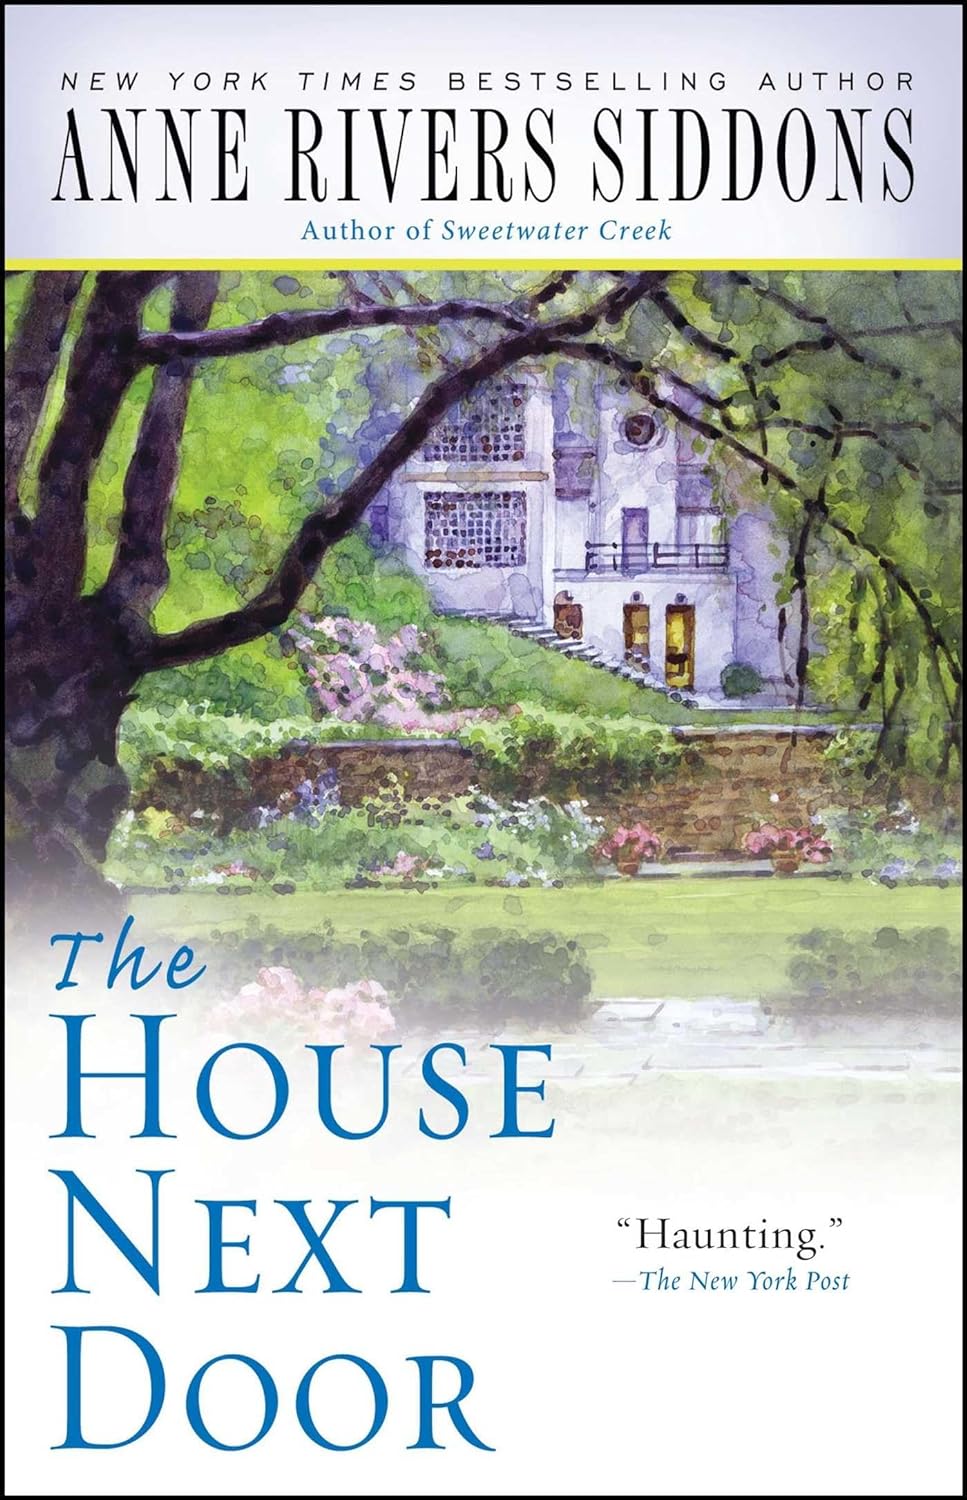 The House Next Door, by Anne Rivers Siddons